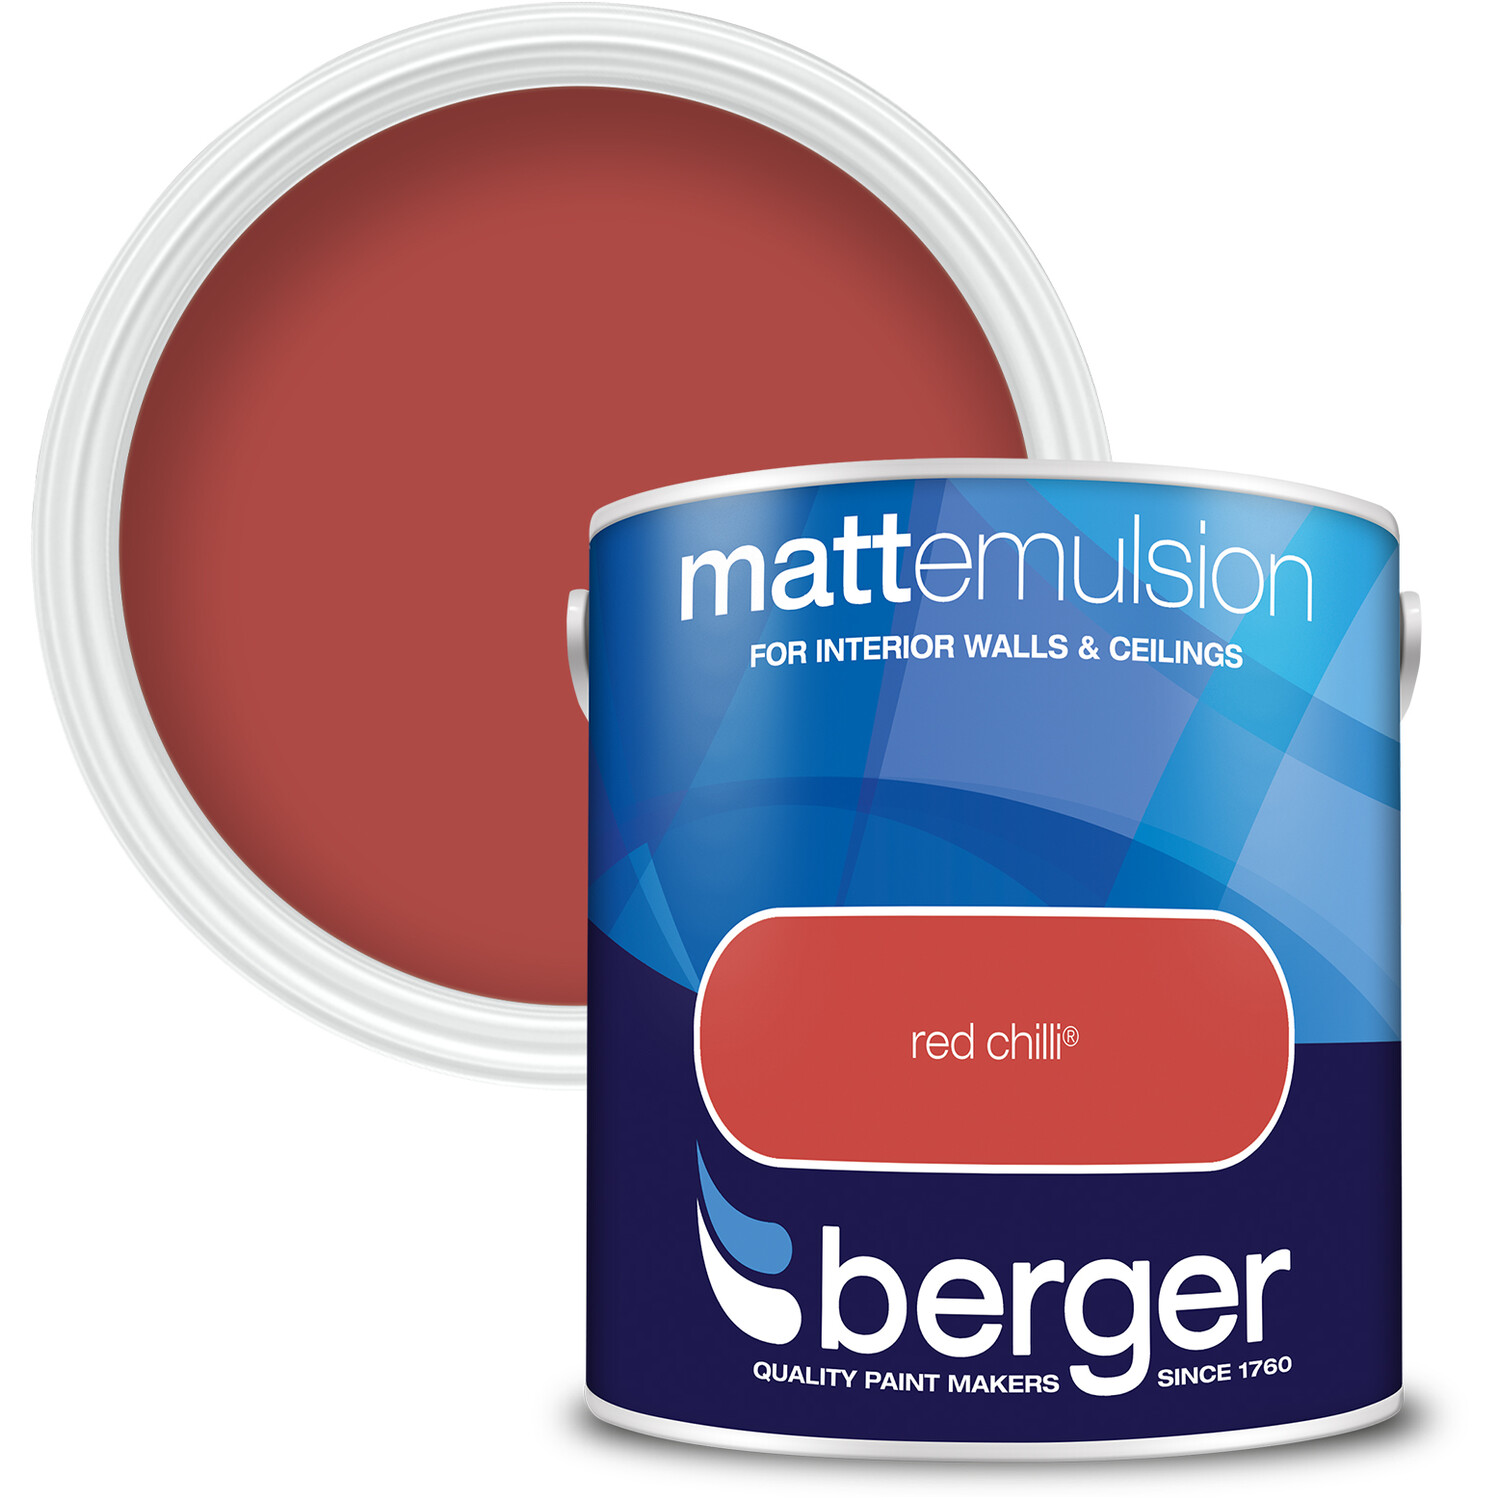 Berger Walls and Ceilings Red Chilli Matt Emulsion Paint 2.5L Image 1